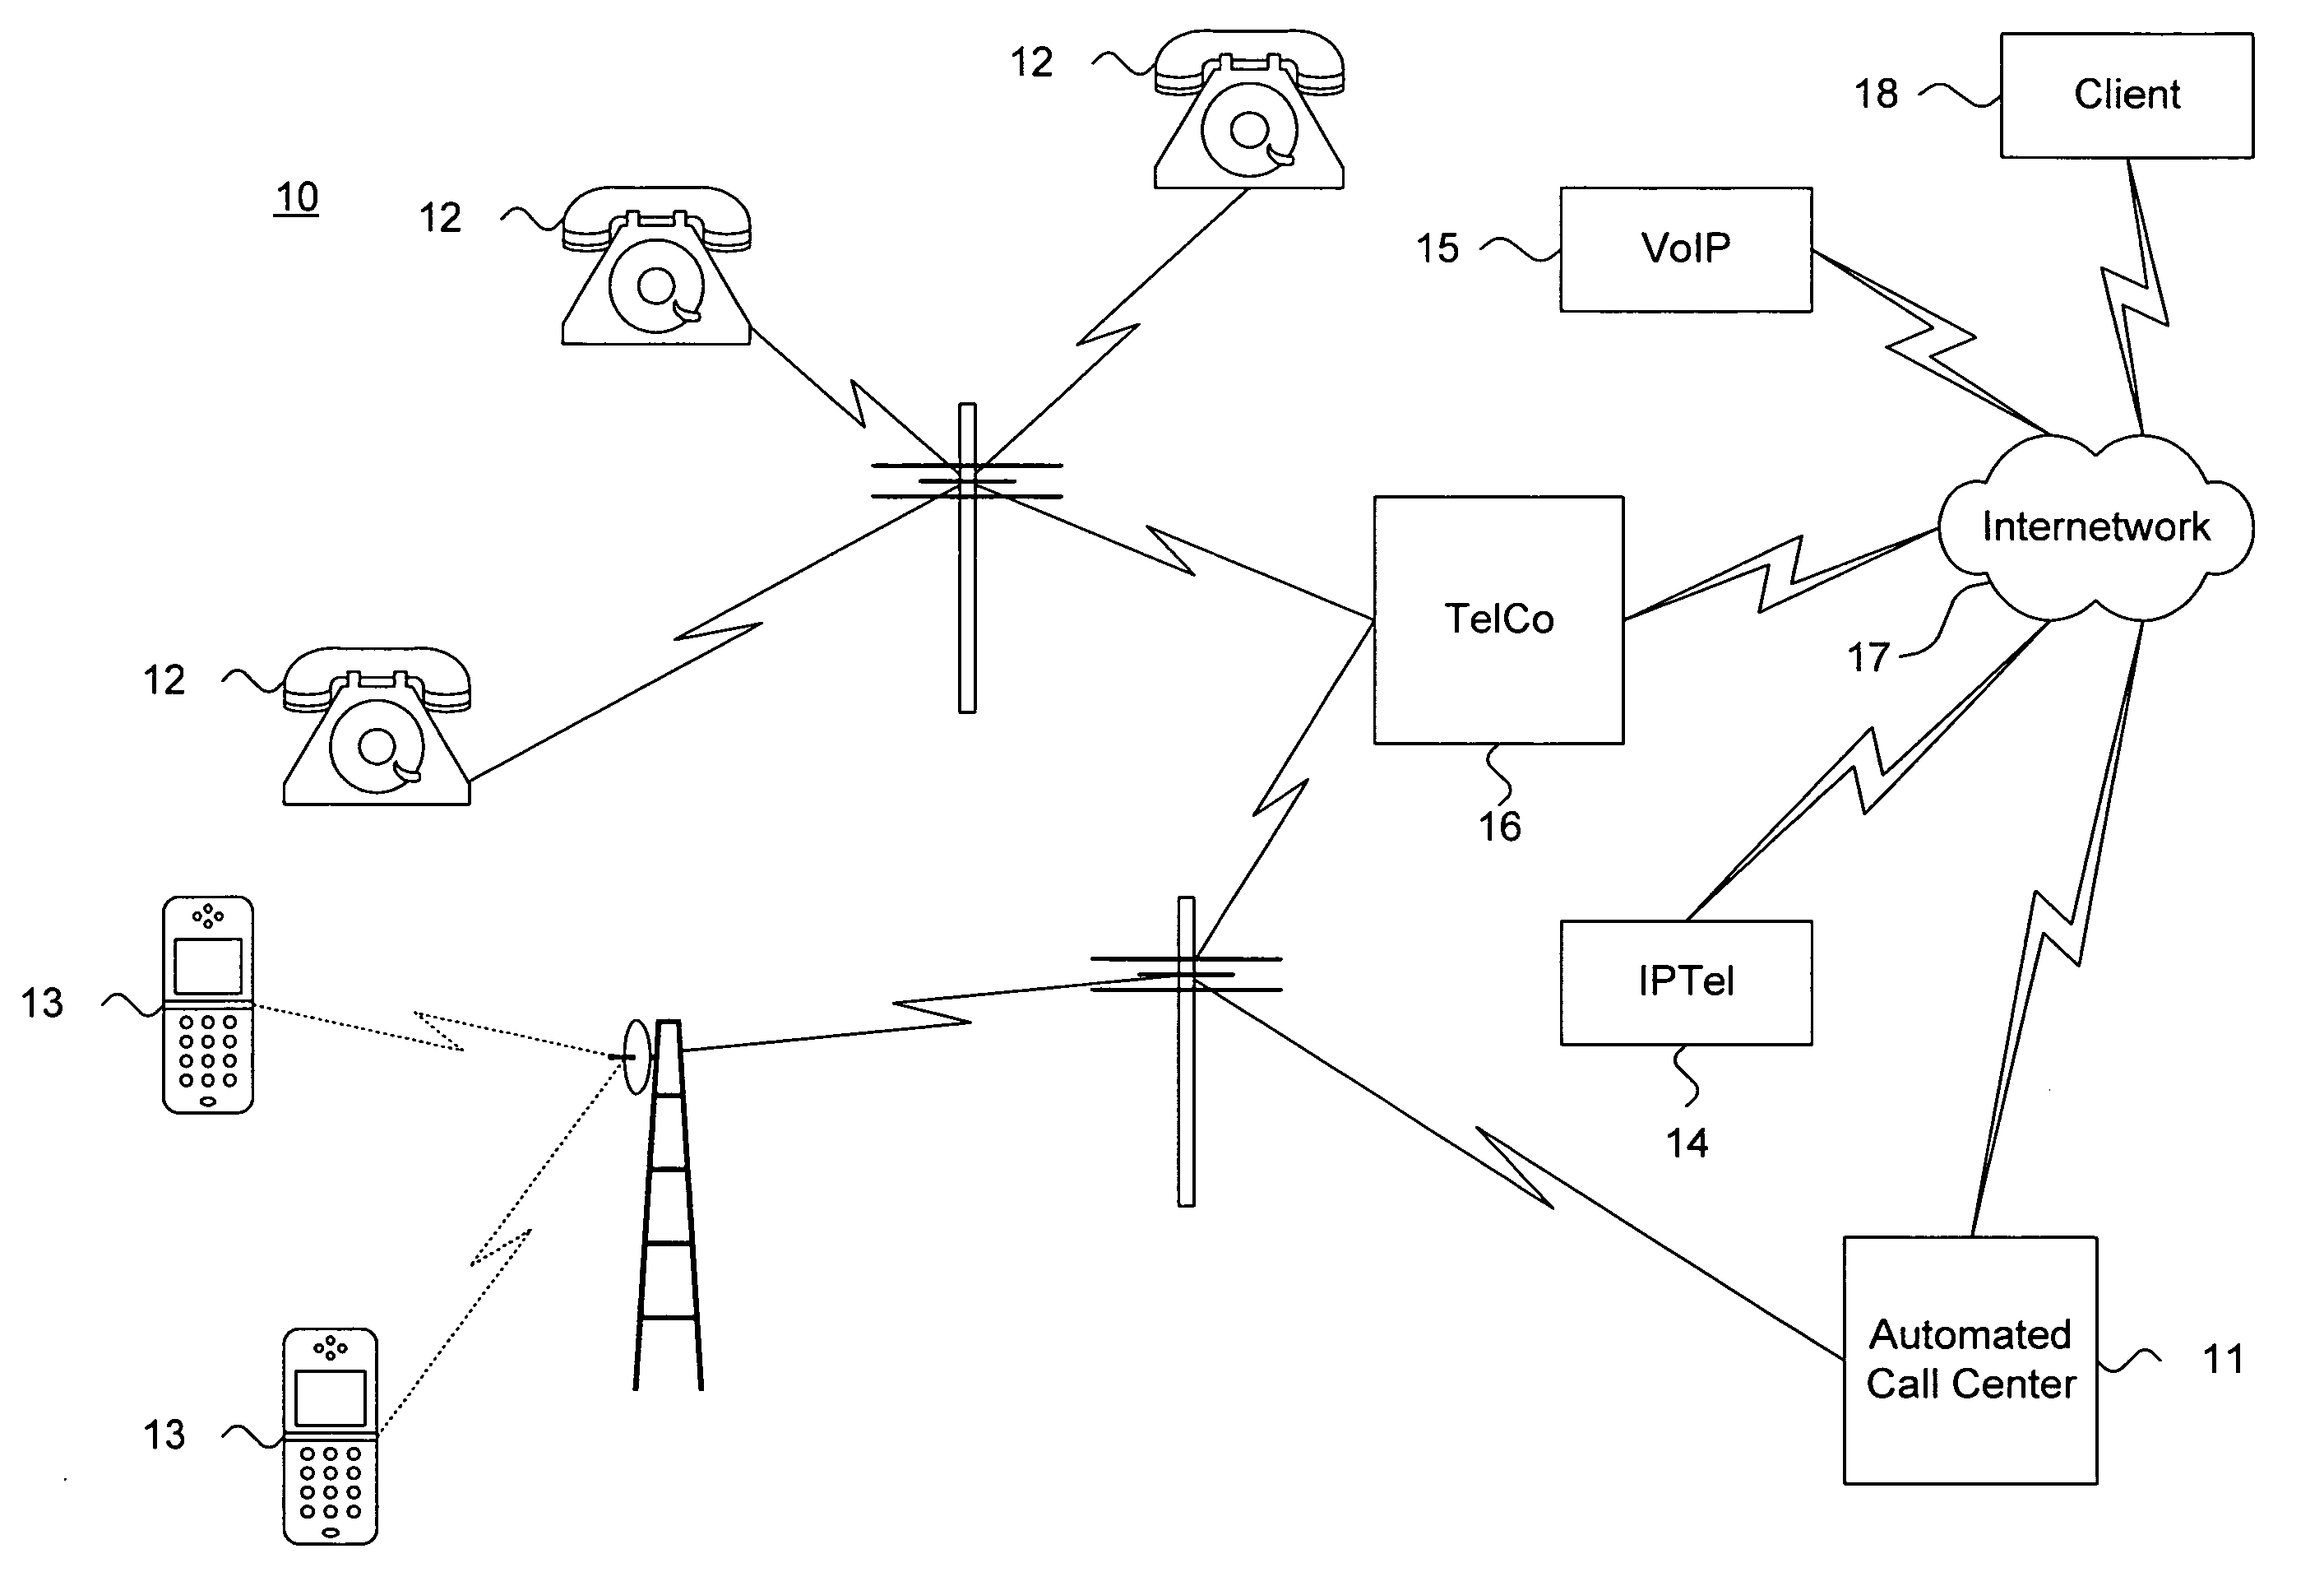 System and method for providing a multi-modal communications infrastructure for automated call center operation